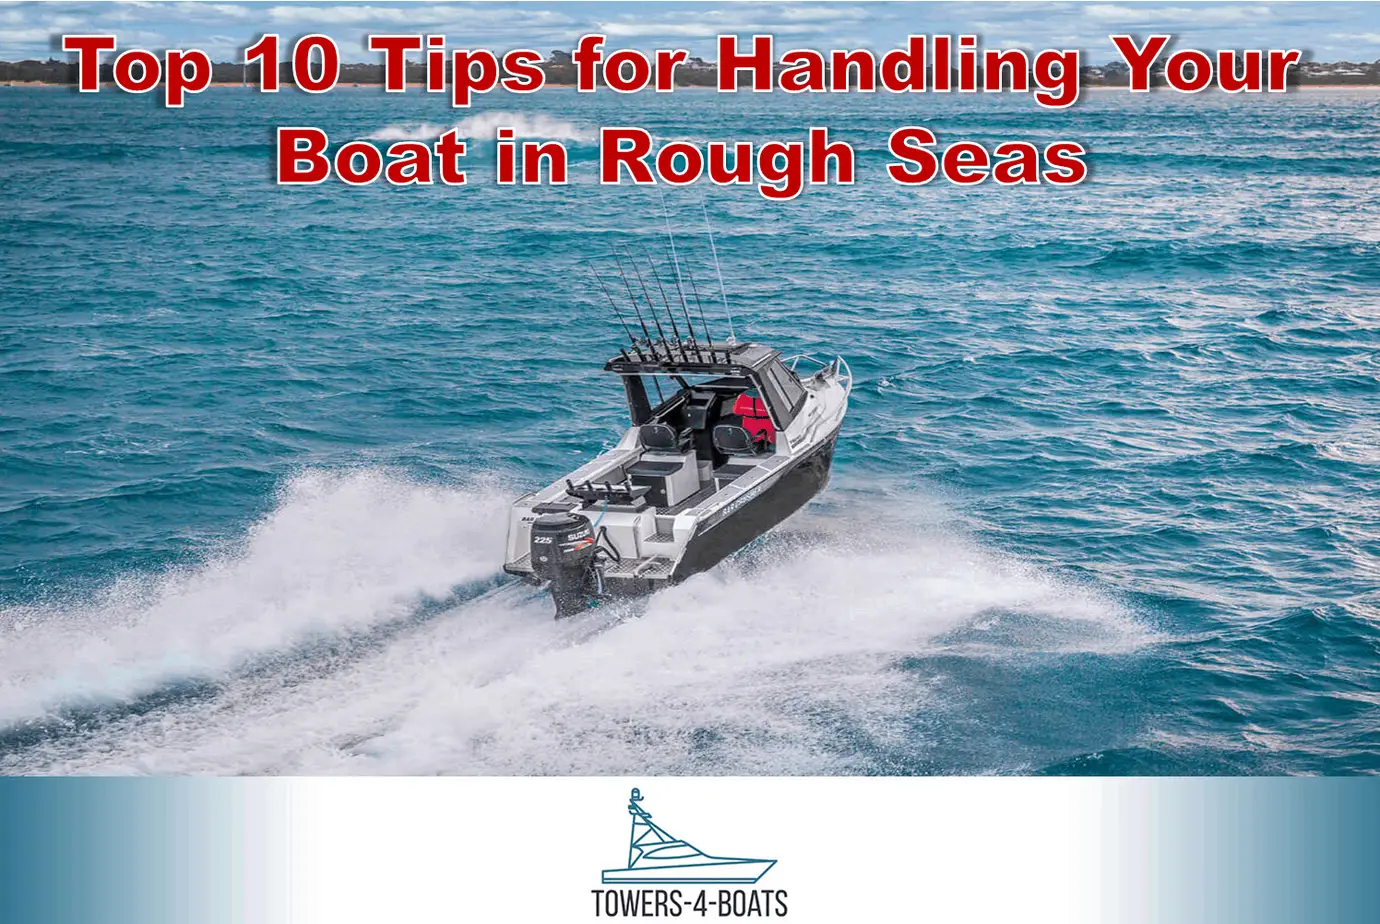 Top 10 Tips for Handling Your Boat in Rough Seas